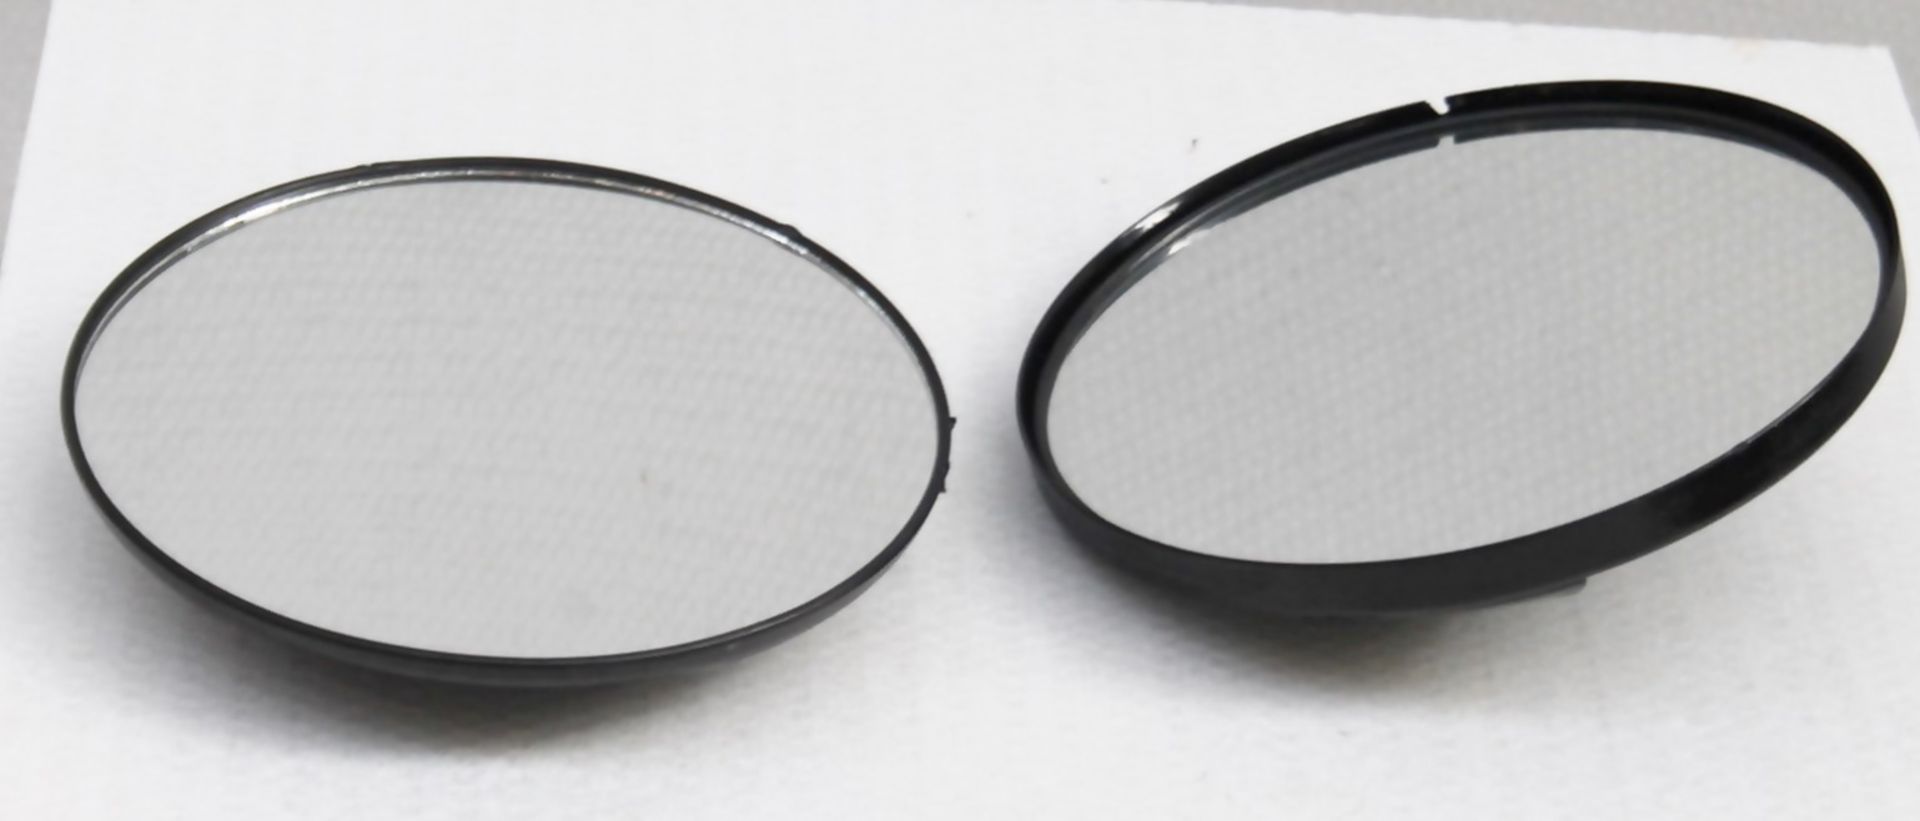 2 x Stylists Round Hand Mirrors - Dimensions (approx): Ø28cm - Recently Removed From A Boutique Hair